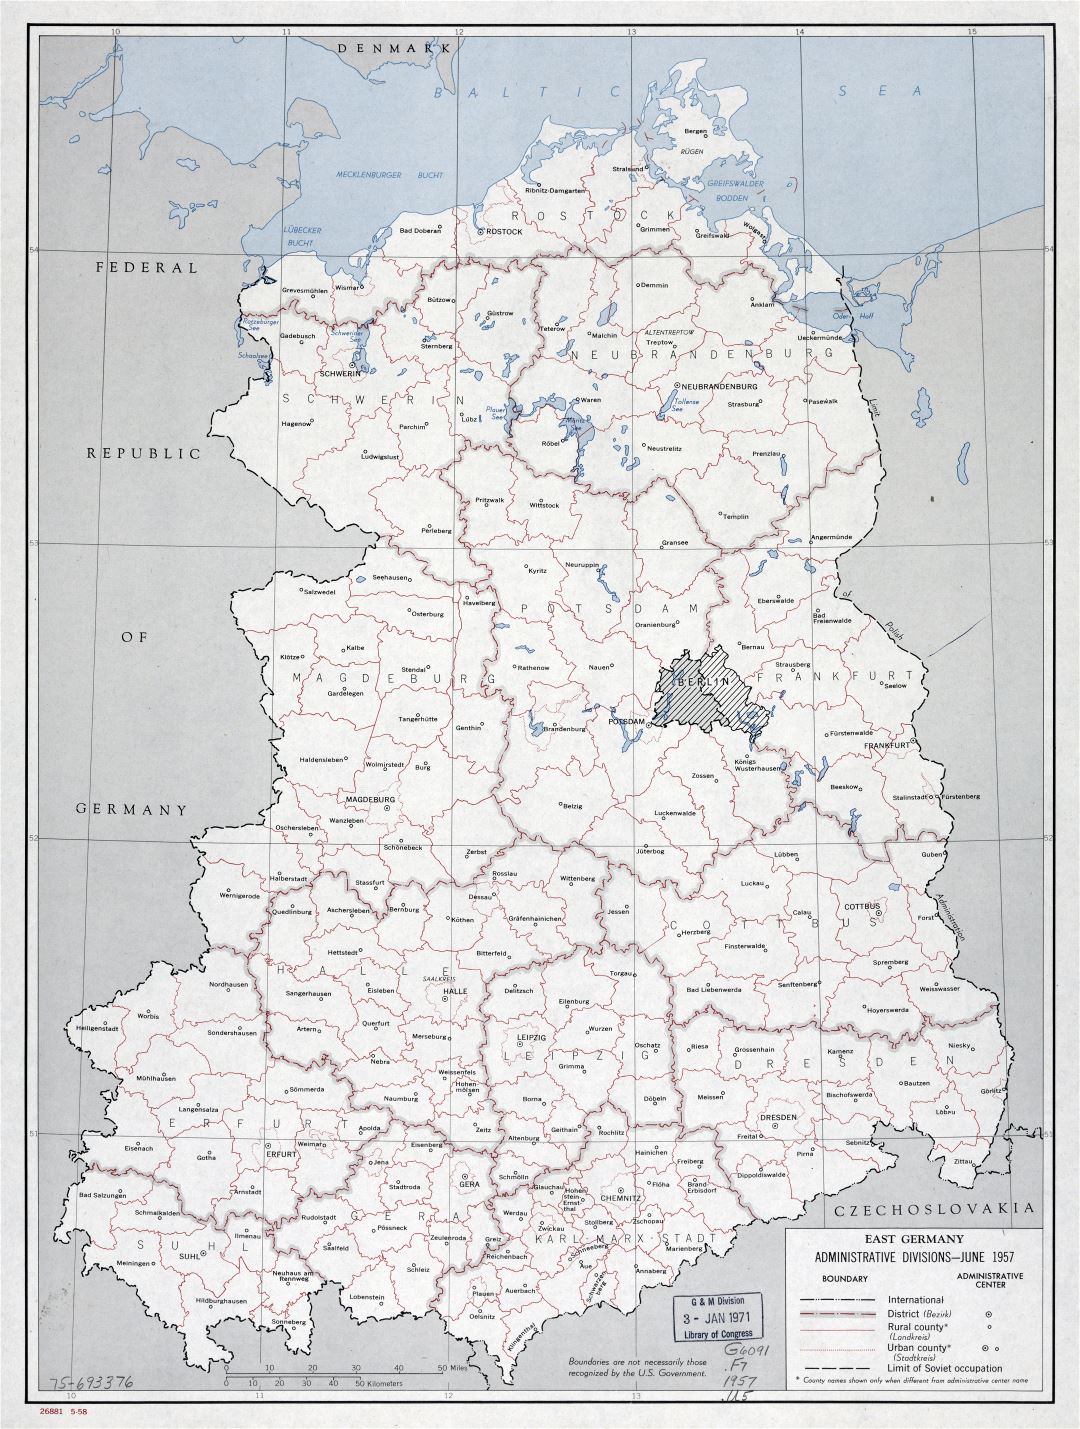 Large scale East Germany administrative divisions map - 1958